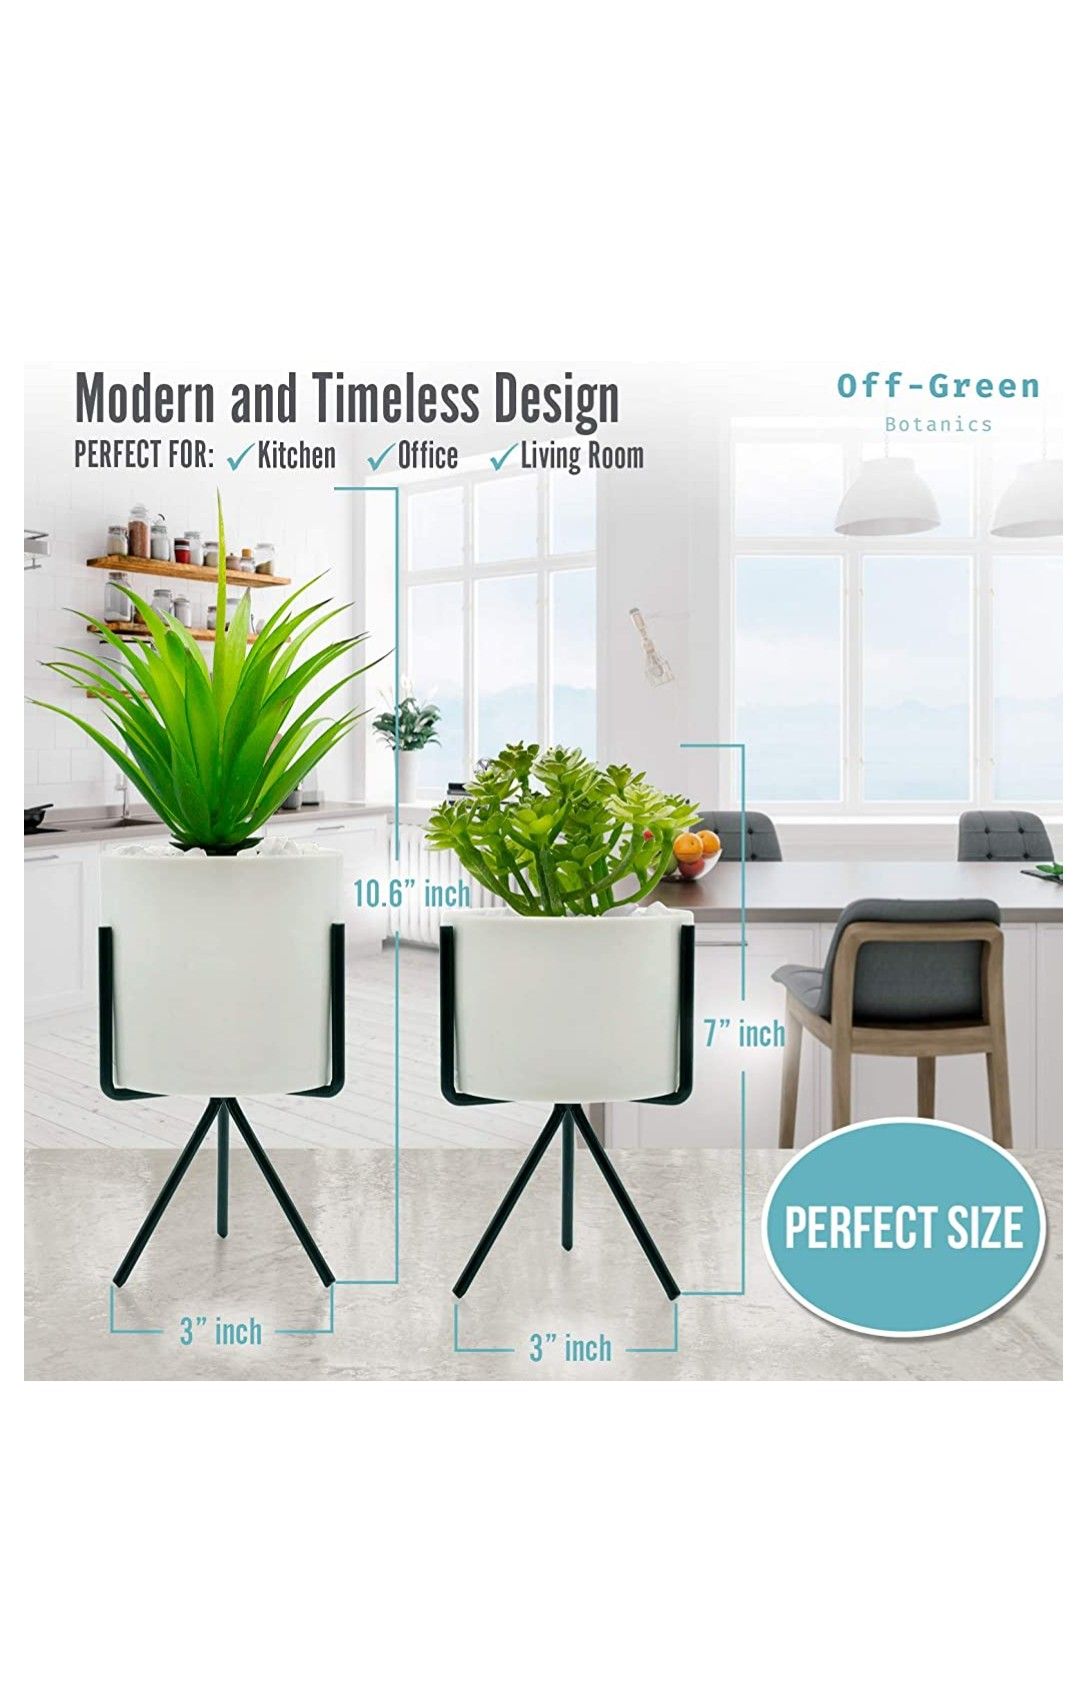 Modern and Realistic Looking Fake Potted Plants – Comes with Chic Ceramic Pots and Metal Stands – 2 Tabletop Plants Perfect for Home, Office